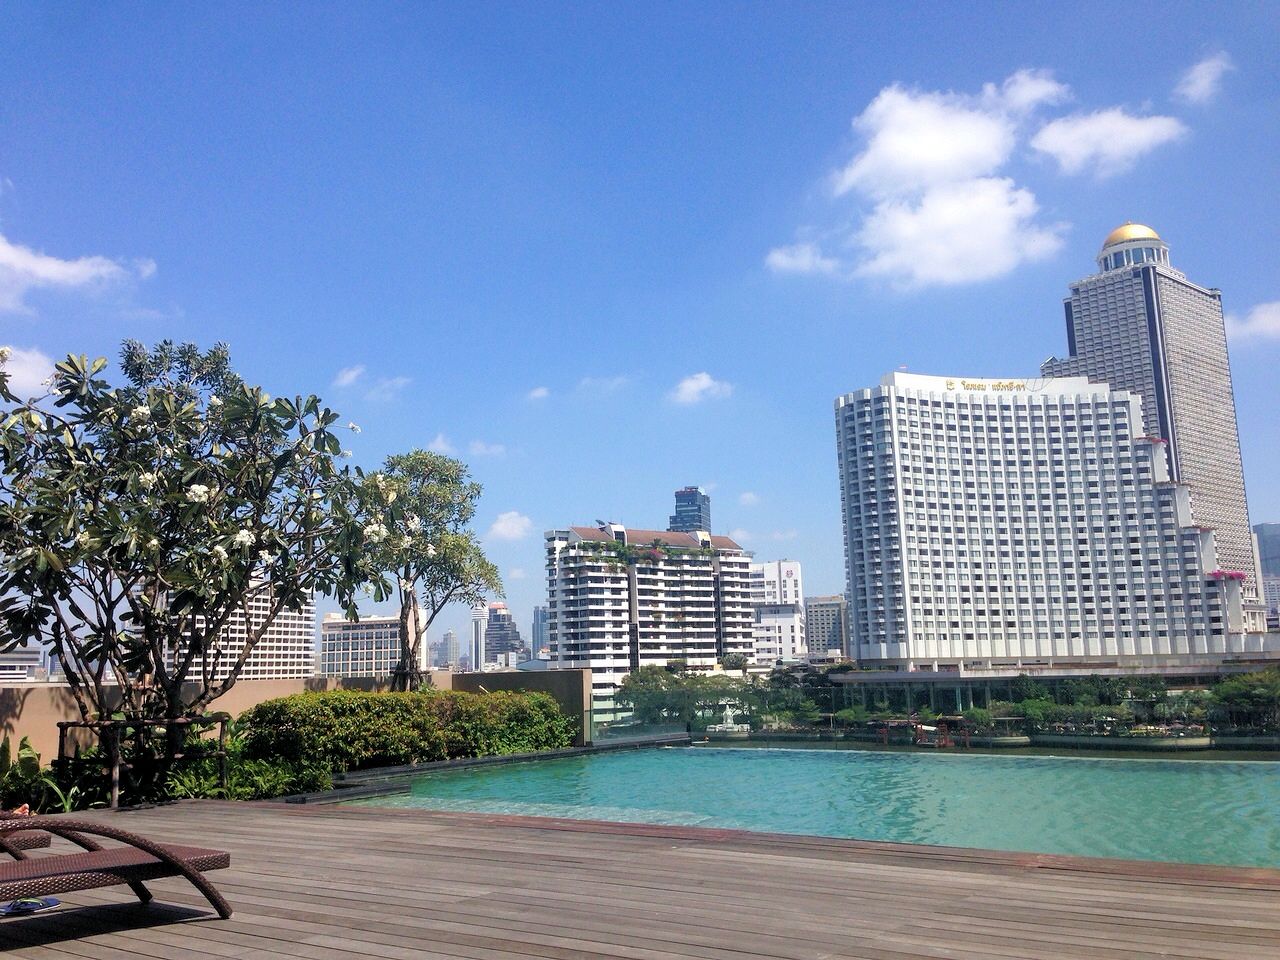 Condo for sale/rent in Bangkok The River condo ,68 sq.m. 1 bedroom fully furnished.